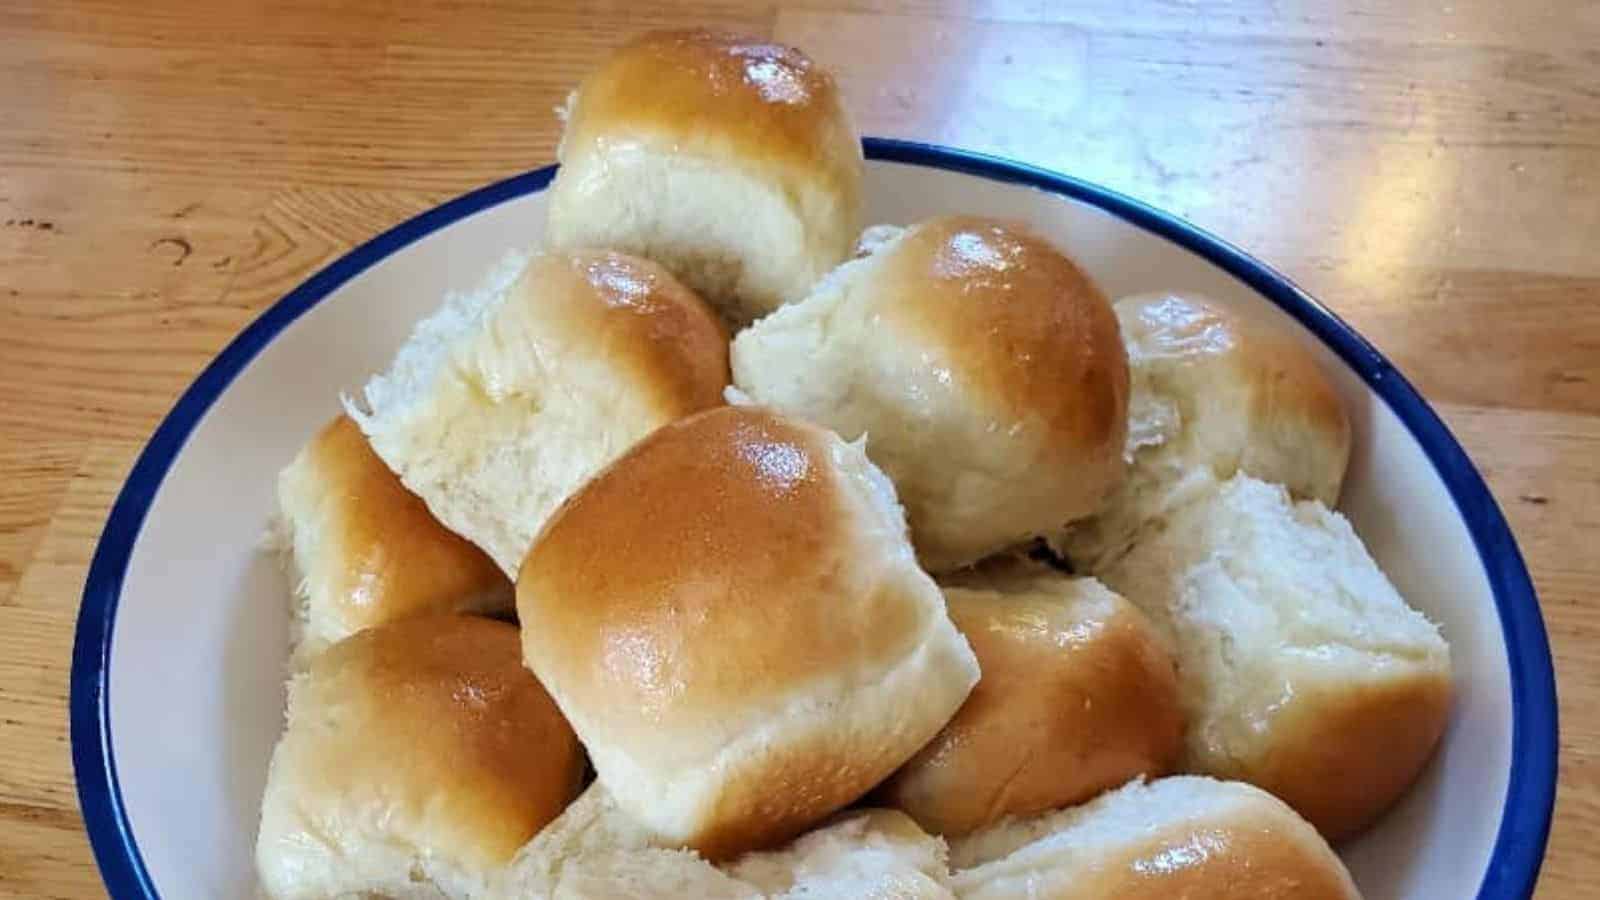 Image shows a bowl filled with Buttery Dinner Rolls.